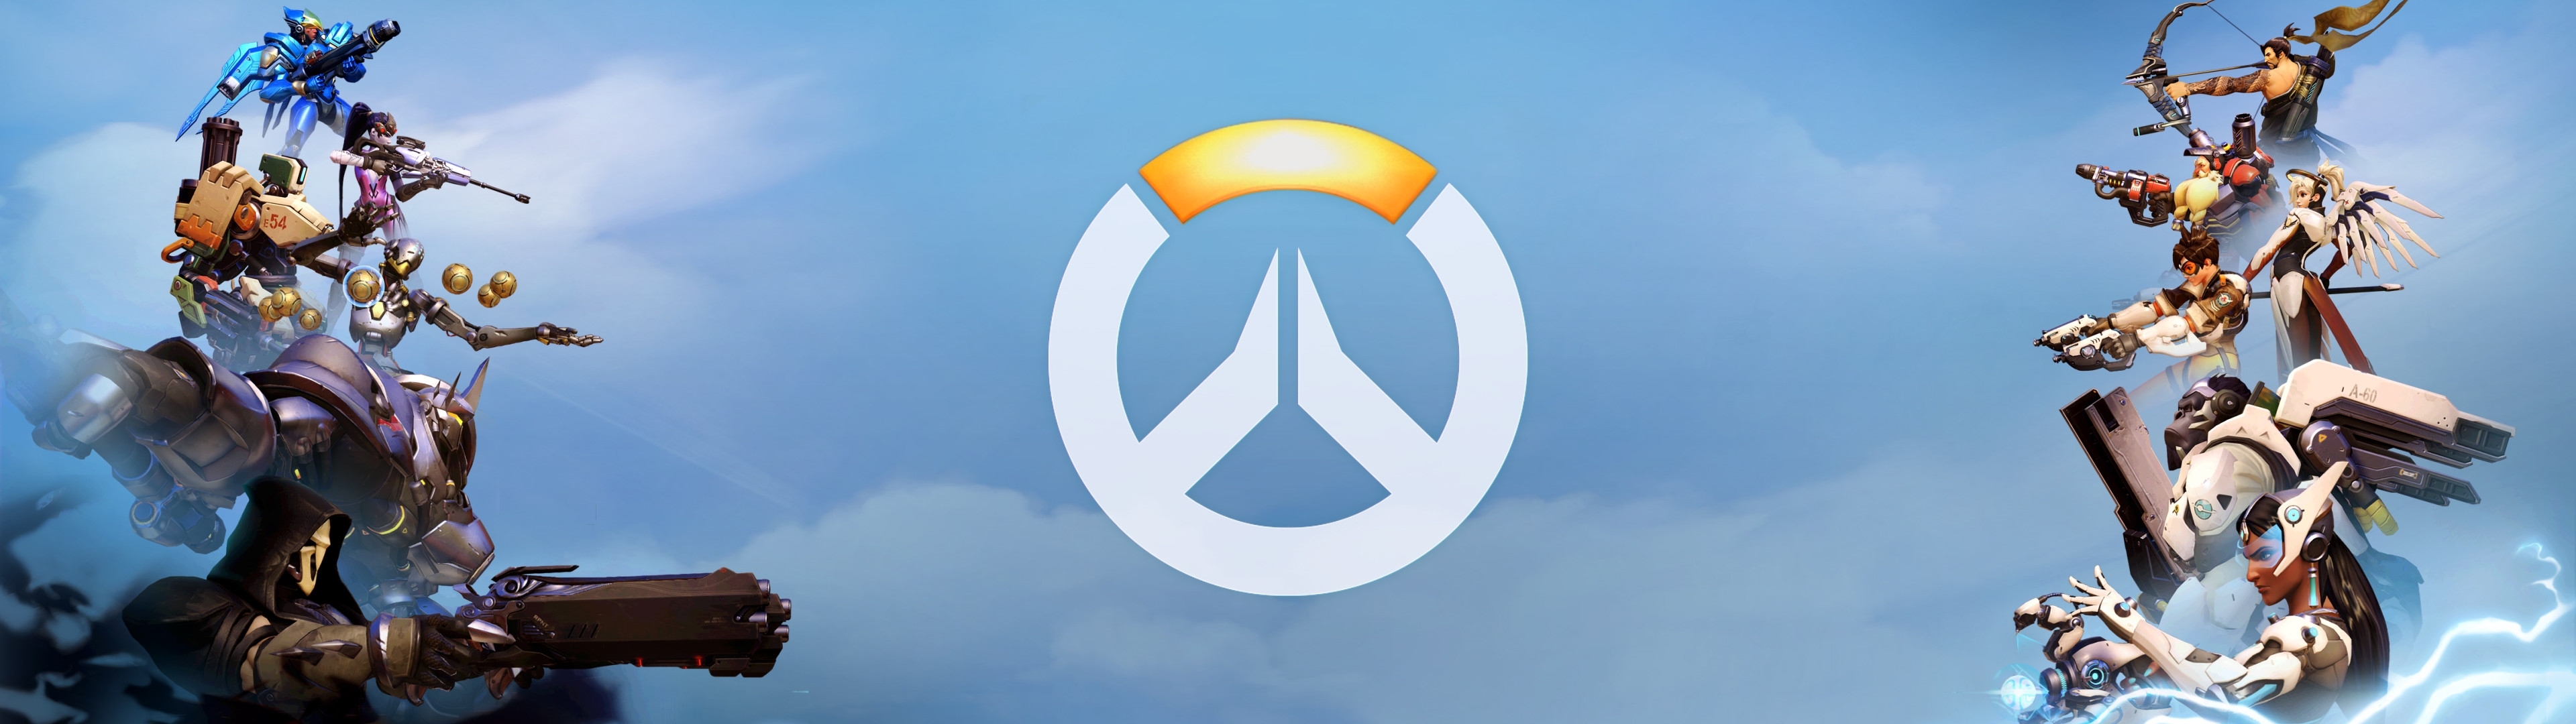 10 New Overwatch Wallpaper Dual Monitor FULL HD 1080p For PC Desktop